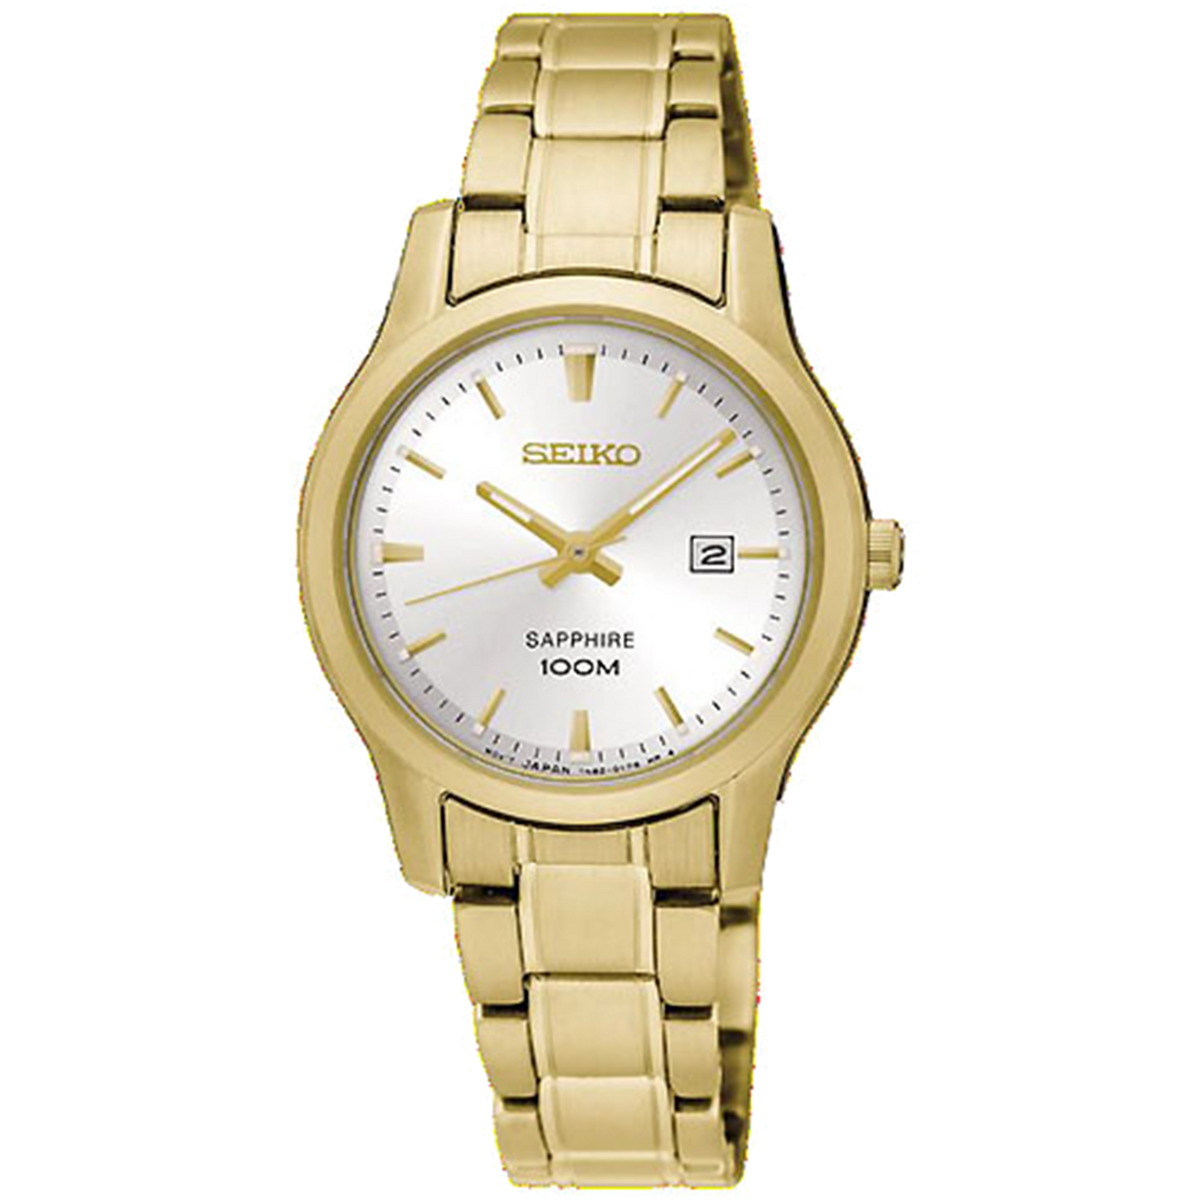 Seiko Watch - Gold Tone with Sapphire Crystal